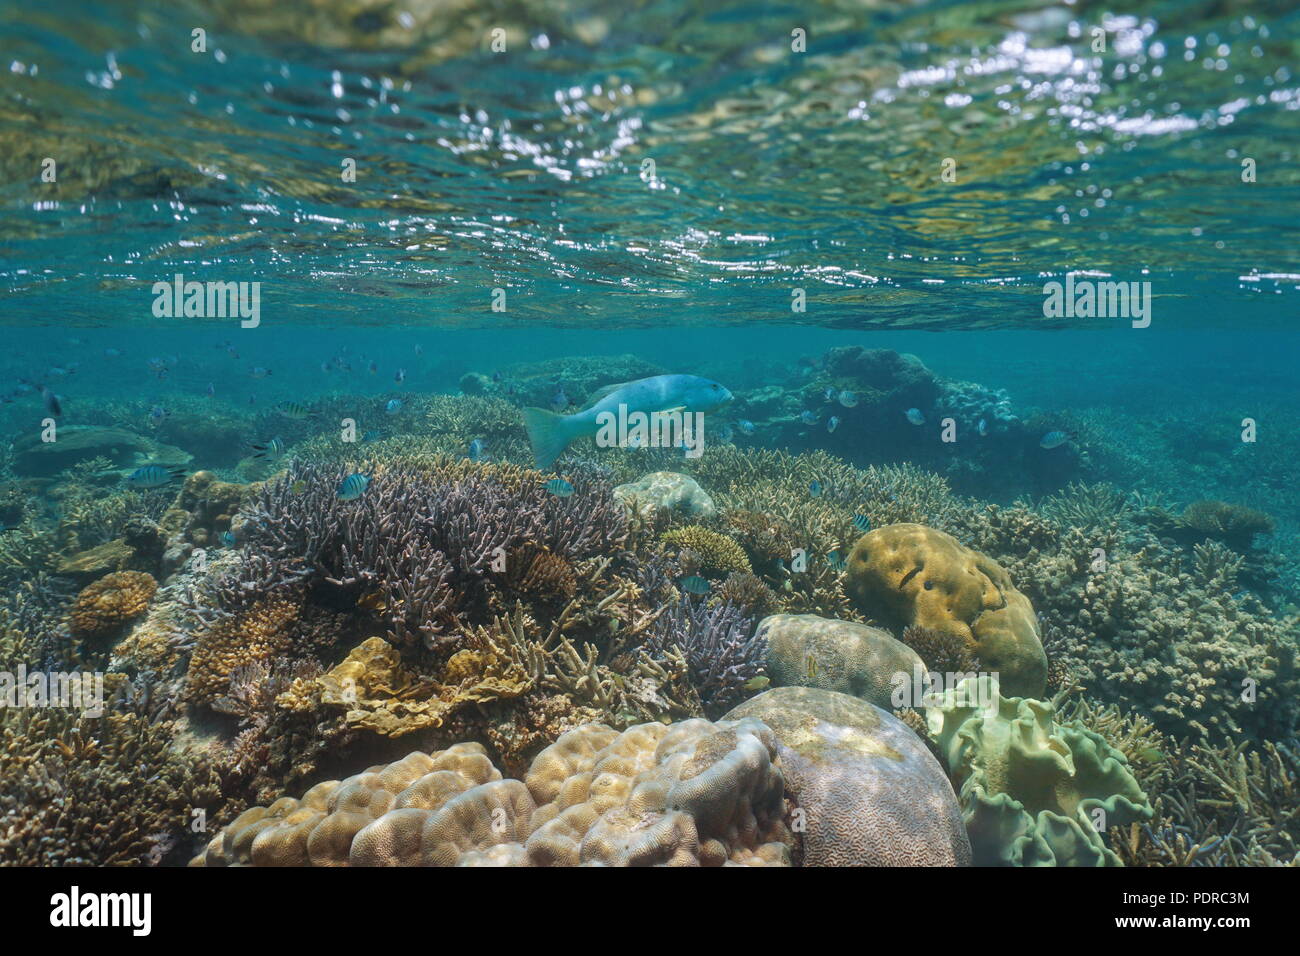 Underwater coral reef below water surface with a leopard coral grouper and sergeant major fish, Pacific ocean, New Caledonia, Oceania Stock Photo